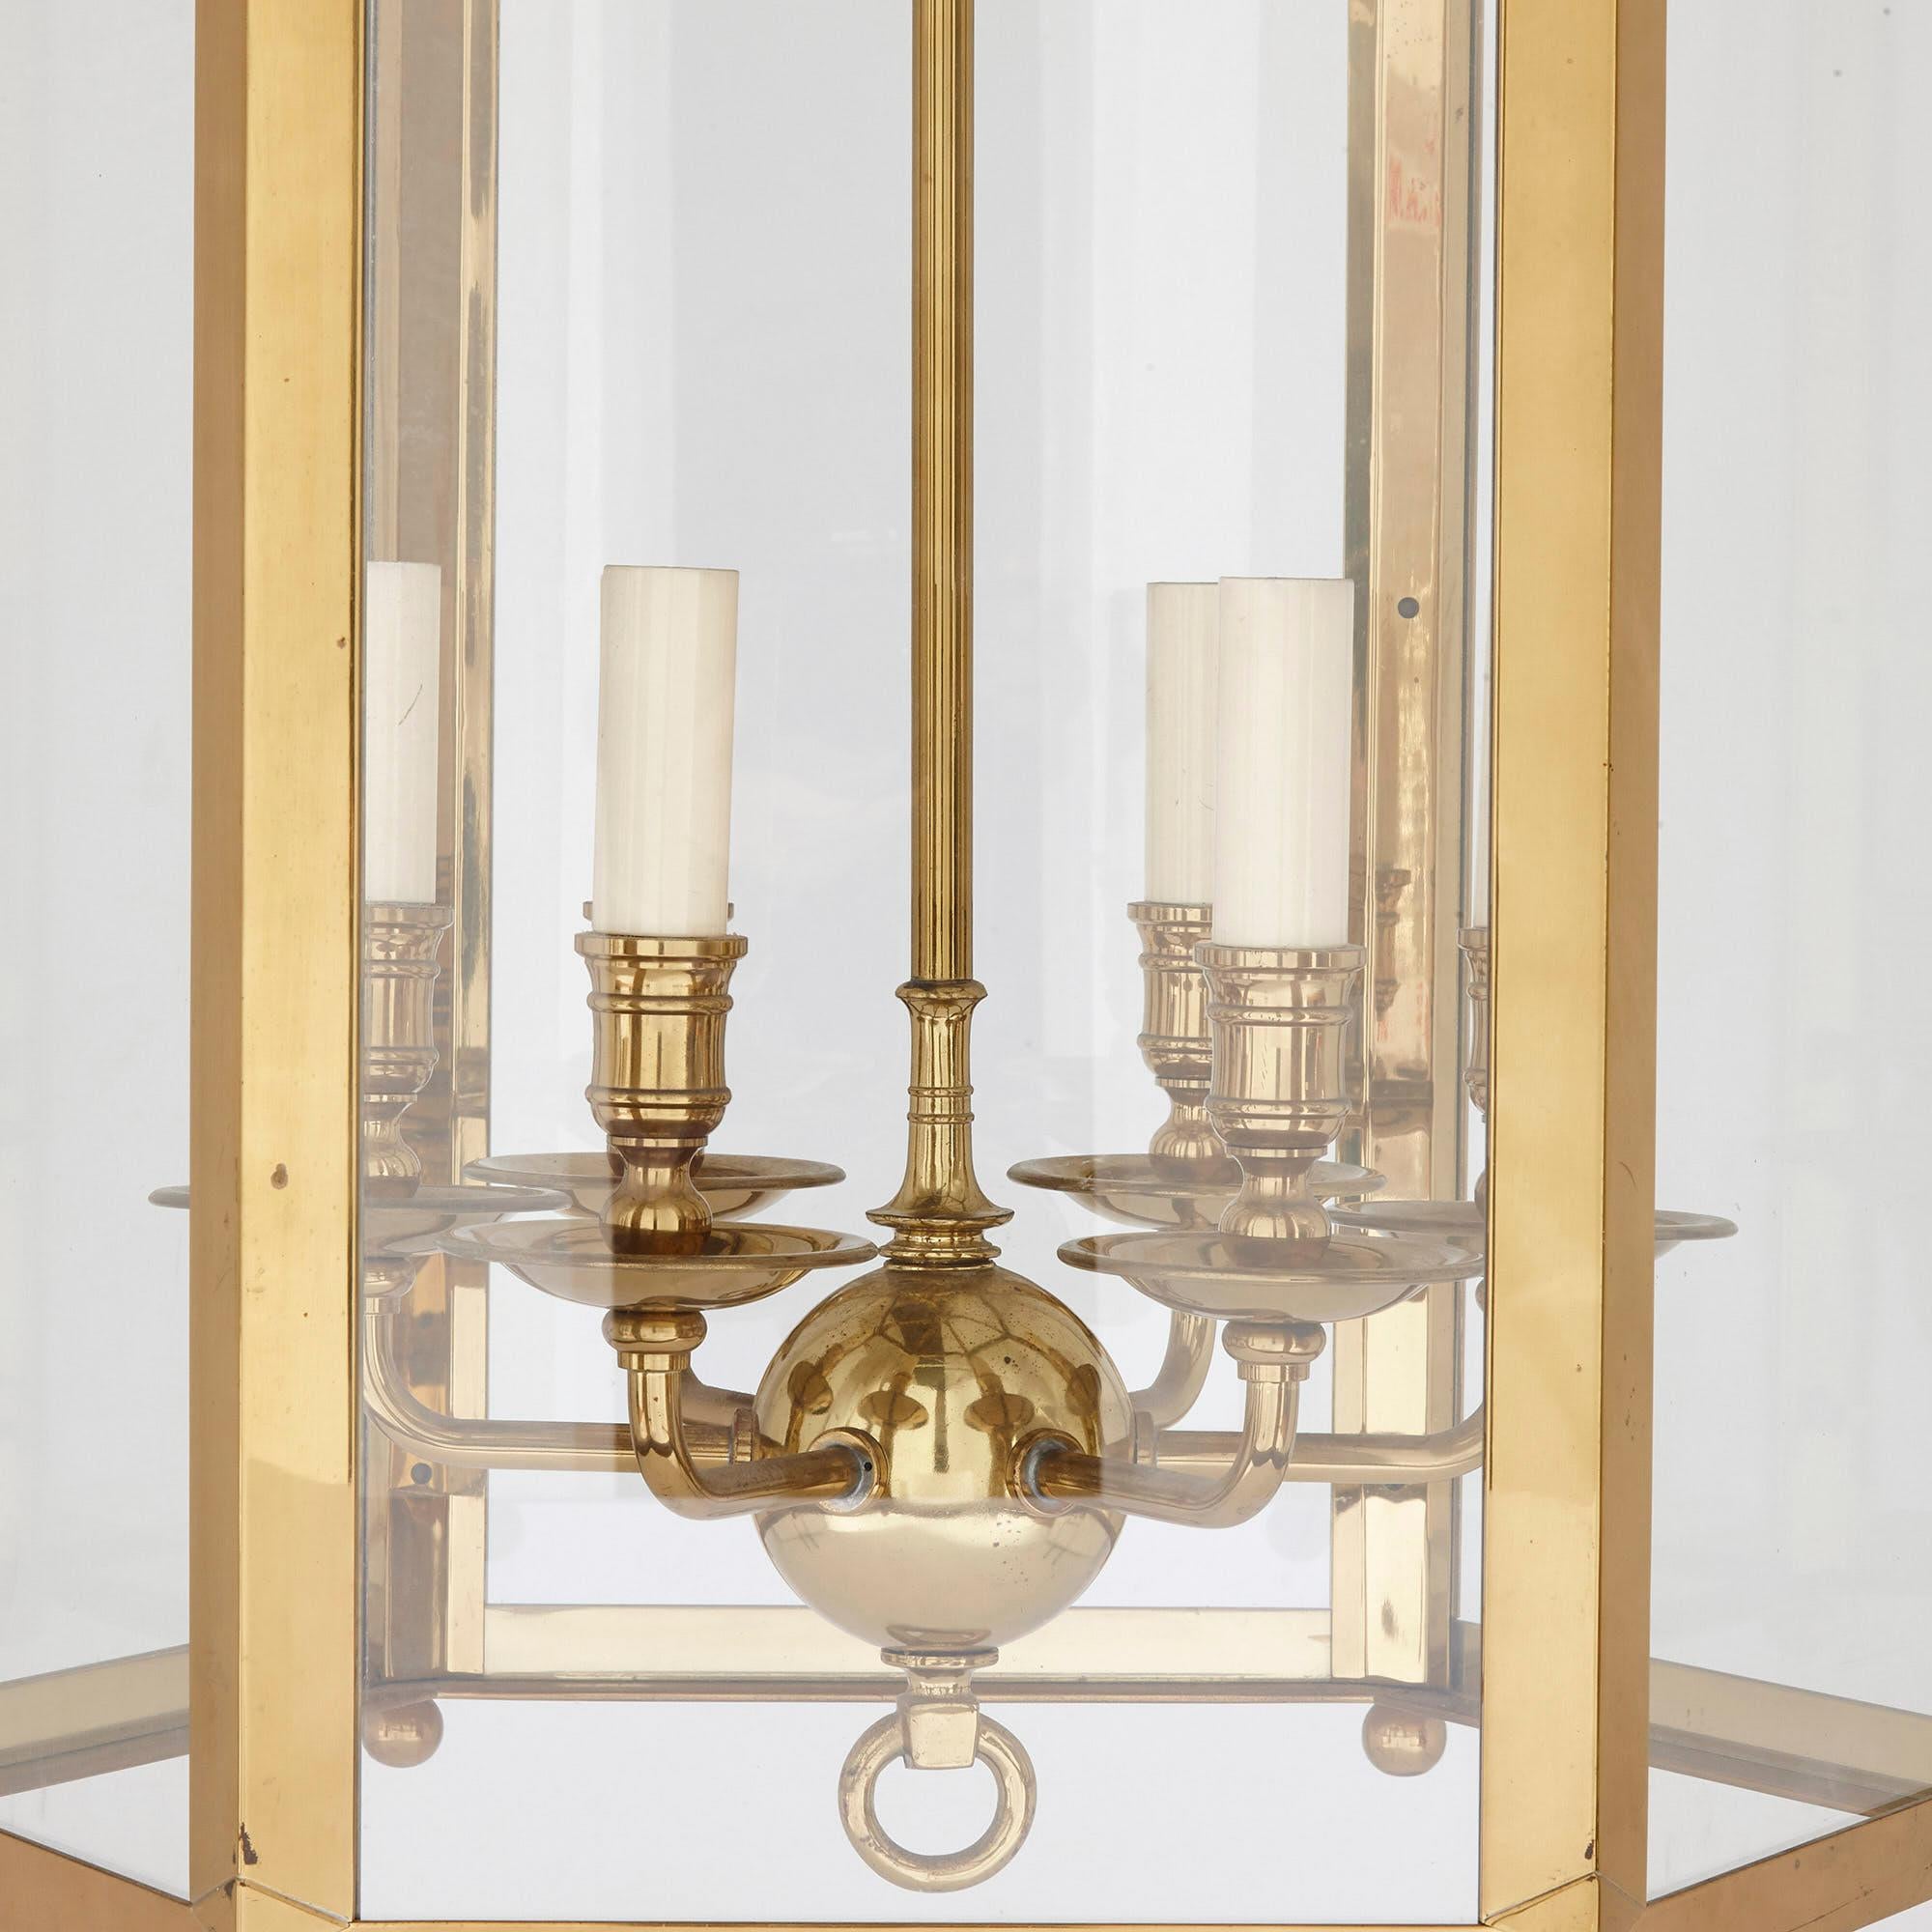 Large neoclassical style brass and plate glass lantern,
French, 20th century
Dimensions: Height 119cm, diameter 64cm

Made from polished brass and plate glass, this large lantern is finely crafted in the neoclassical style. It is supported by